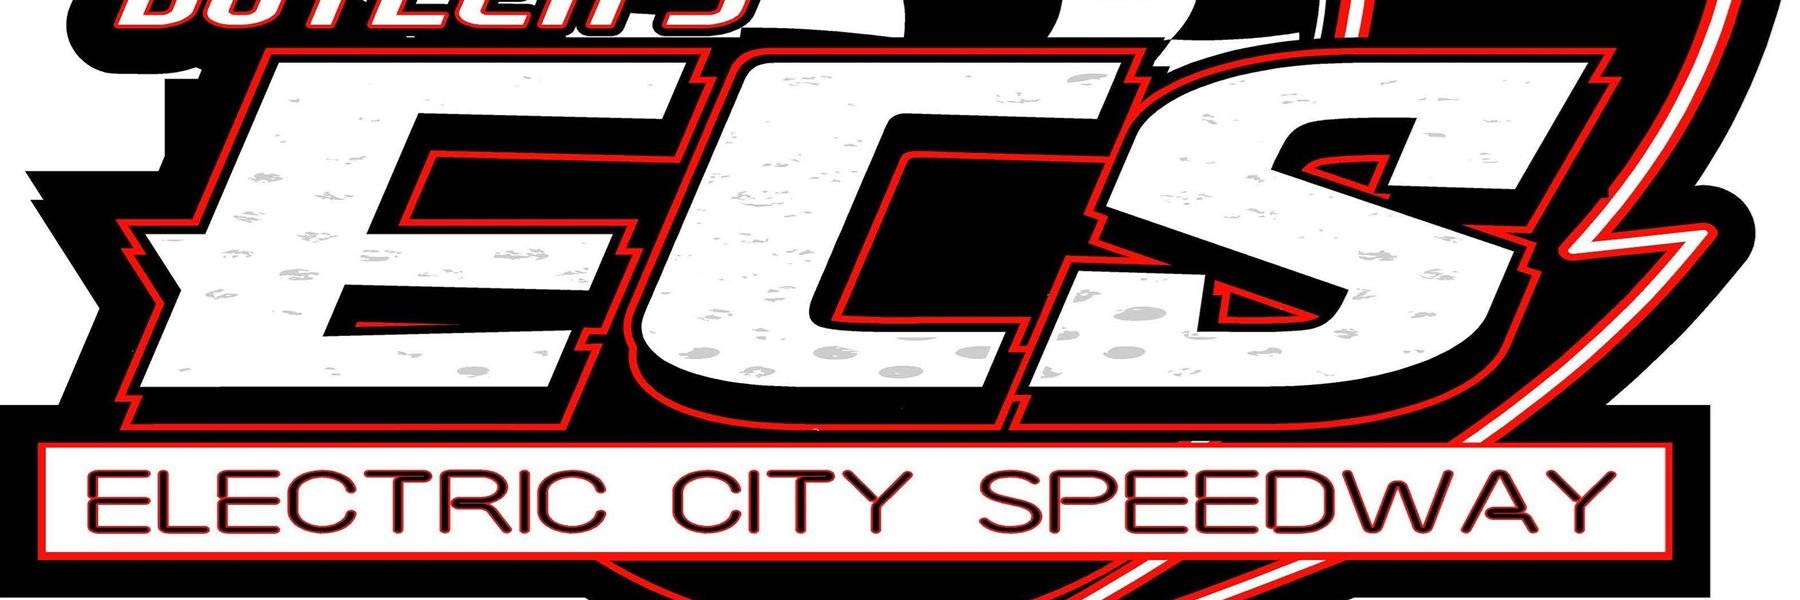 5/29/2022 - Electric City Speedway